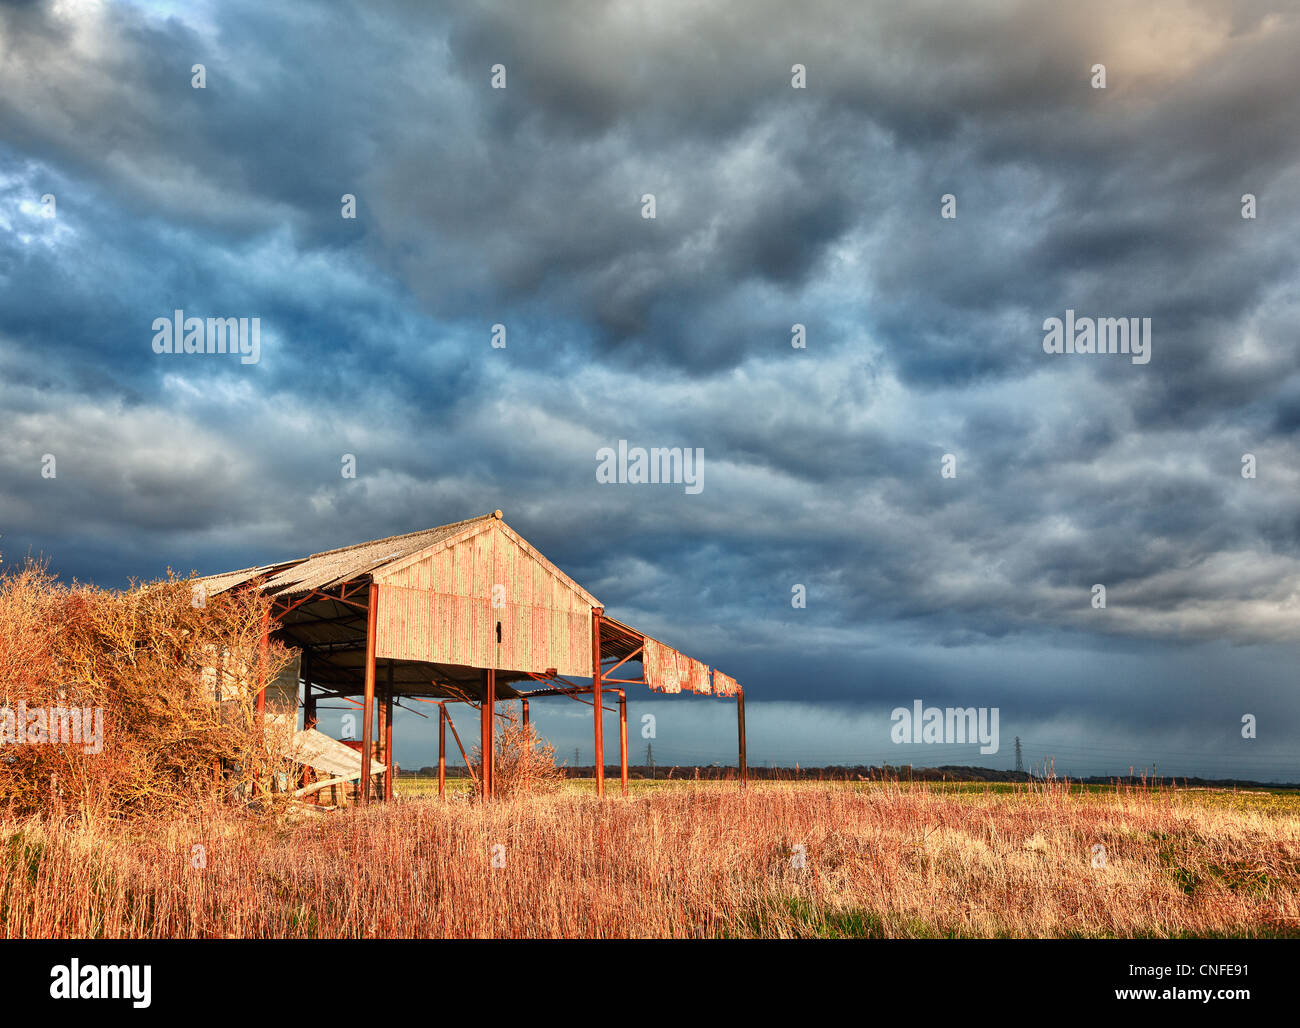 Storm clouds over sunlit deserted and ruined barn on farmland Stock Photo